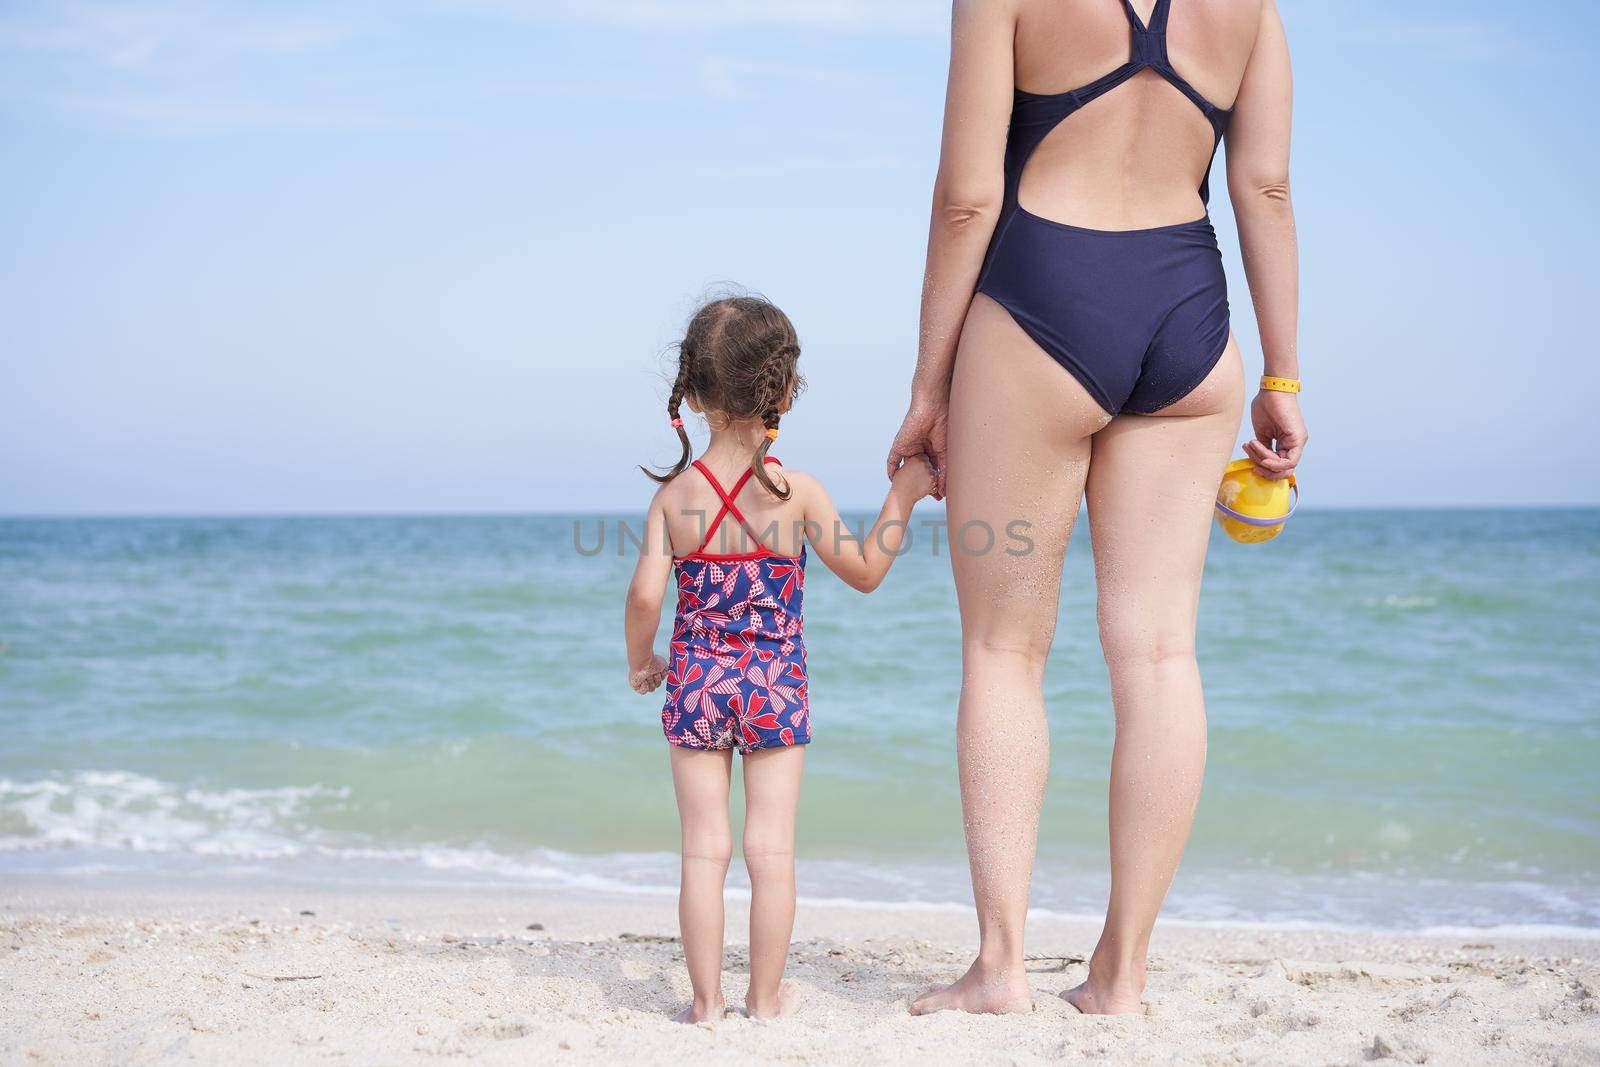 Mother daughter beach together rear view Unrecognizable caucasian woman little girl swimwear standing seaside back Family with one child. Family Vacation Summertime